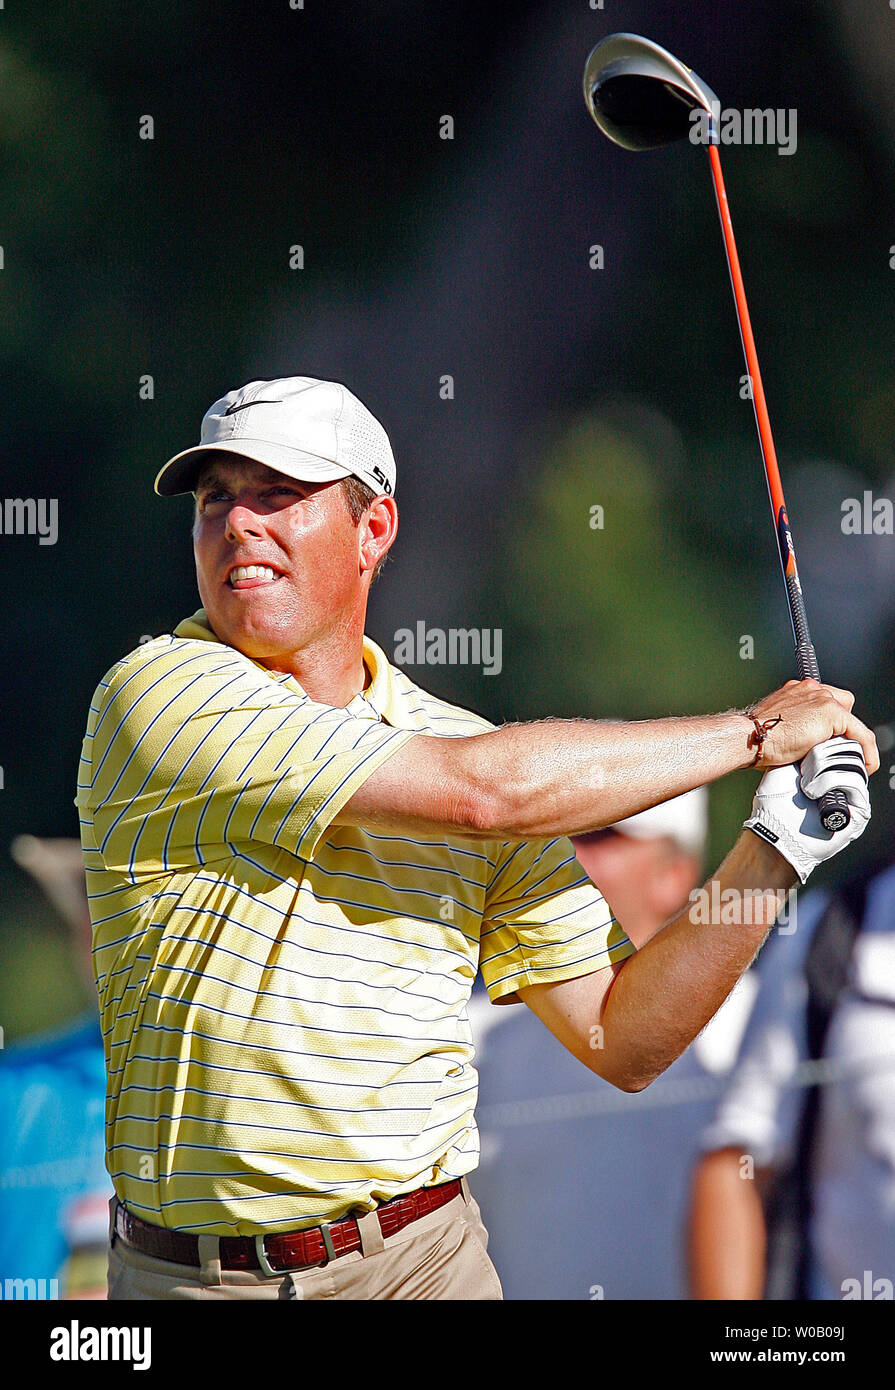 Justin Leonard watches his tee shot on the fourth hole in the second  round of the 89th PGA Championship at Southern Hills Country Club in Tulsa, Oklahoma on August 9, 2007.   (UPI Photo/Gary C. Caskey) Stock Photo